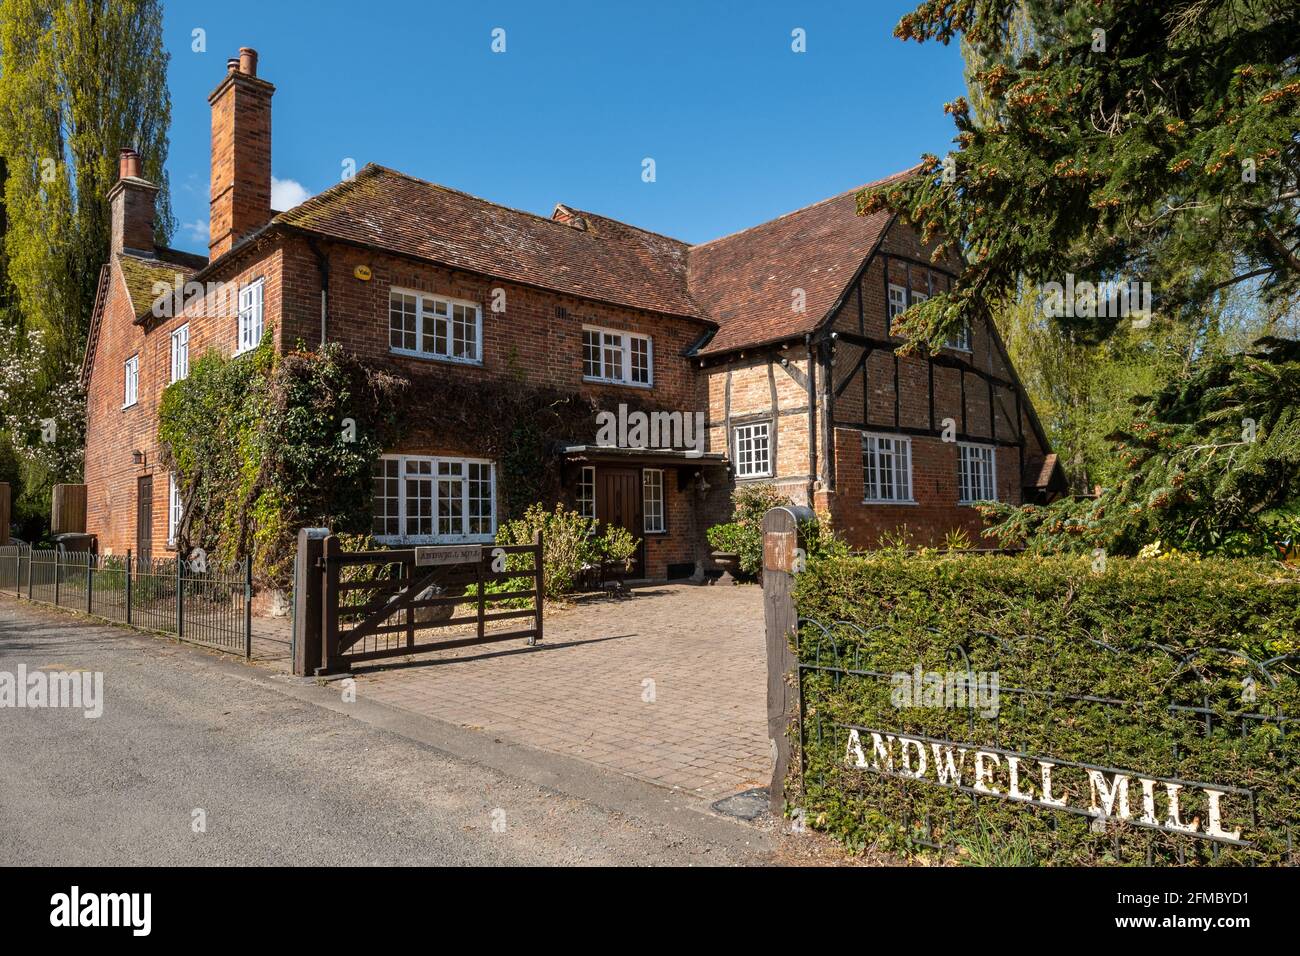 Andwell Mill in the small hamlet of Andwell in Hampshire, England, UK Stock Photo